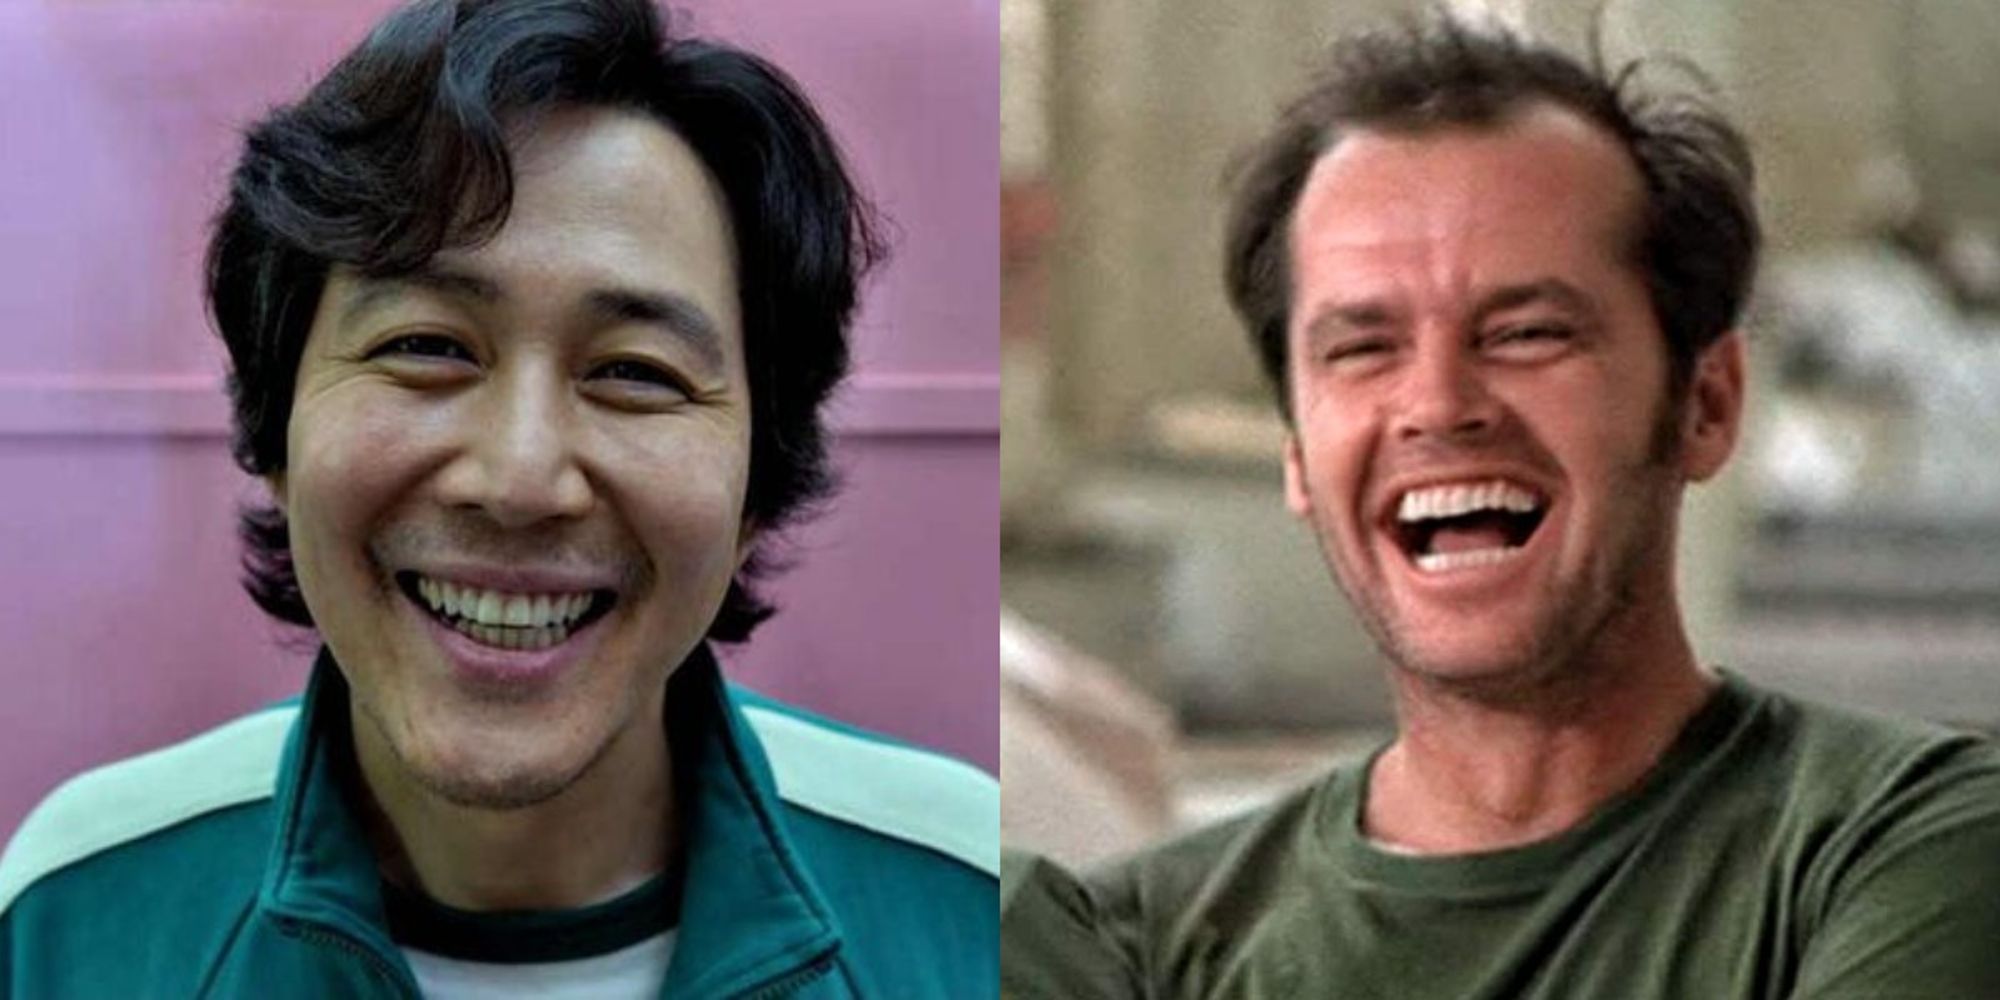 Lee Jung-jae as Seong Gi-hun in Squid Game beside Jack Nicholson as Randle McMurphy in One Flew Over The Cuckoo's Nest as featured image in Squid Game retrocast '70s